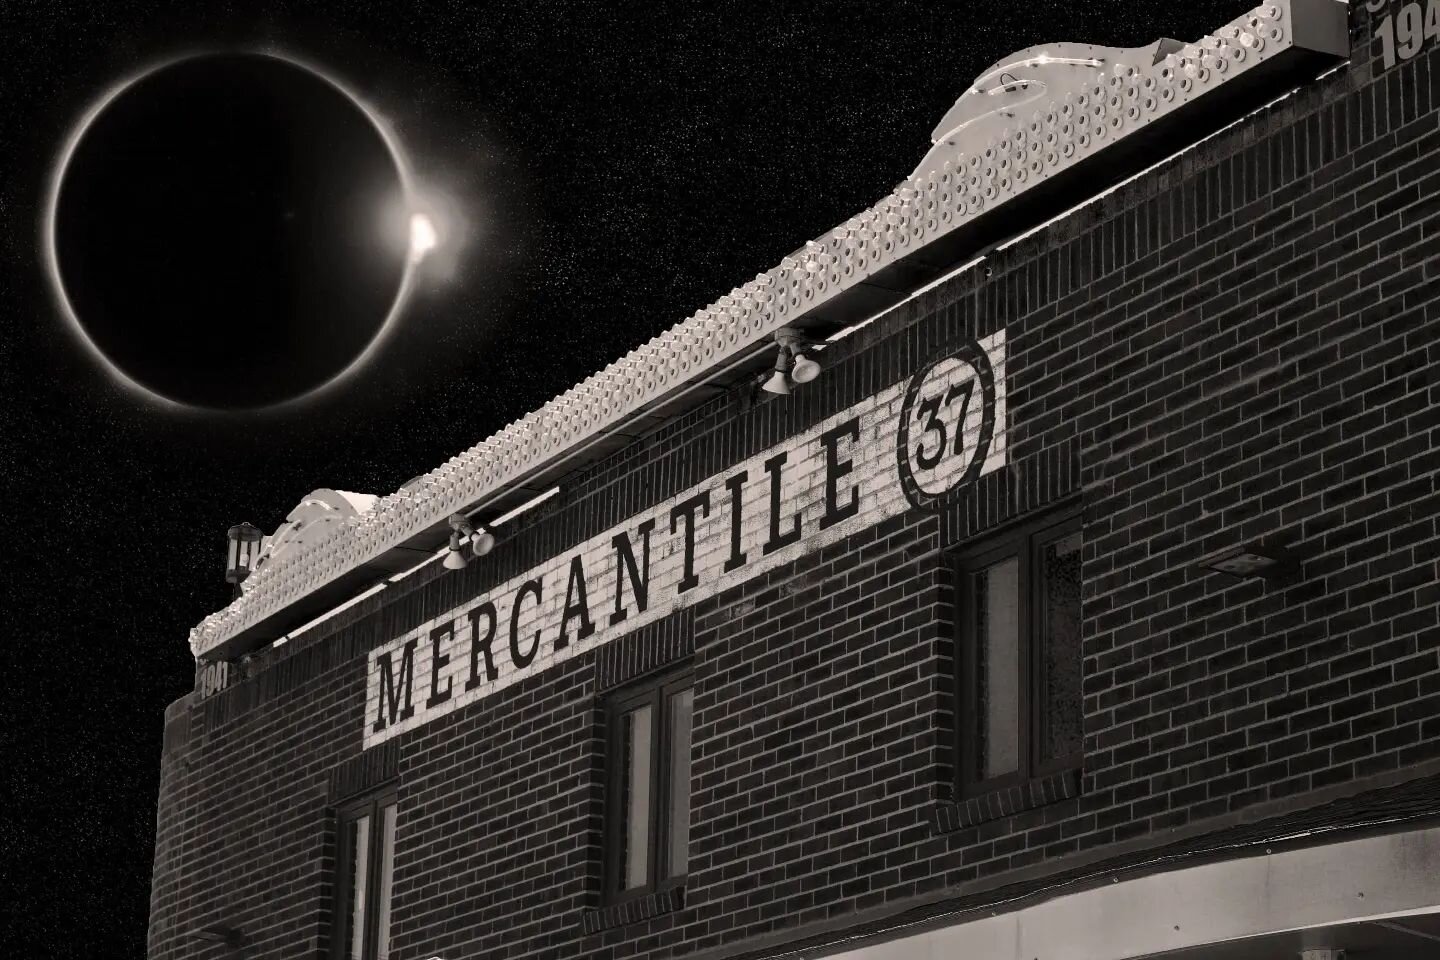 Today is the day! Conditions are shaping up to be perfect for viewing! Come out, grab a sandwich and cocktail, and hang with us in the middle of nowhere. Open today 12-4. 

Stay safe out there!

#totaleclipse #blackout #eclipse2024 #mercantile37
#whe